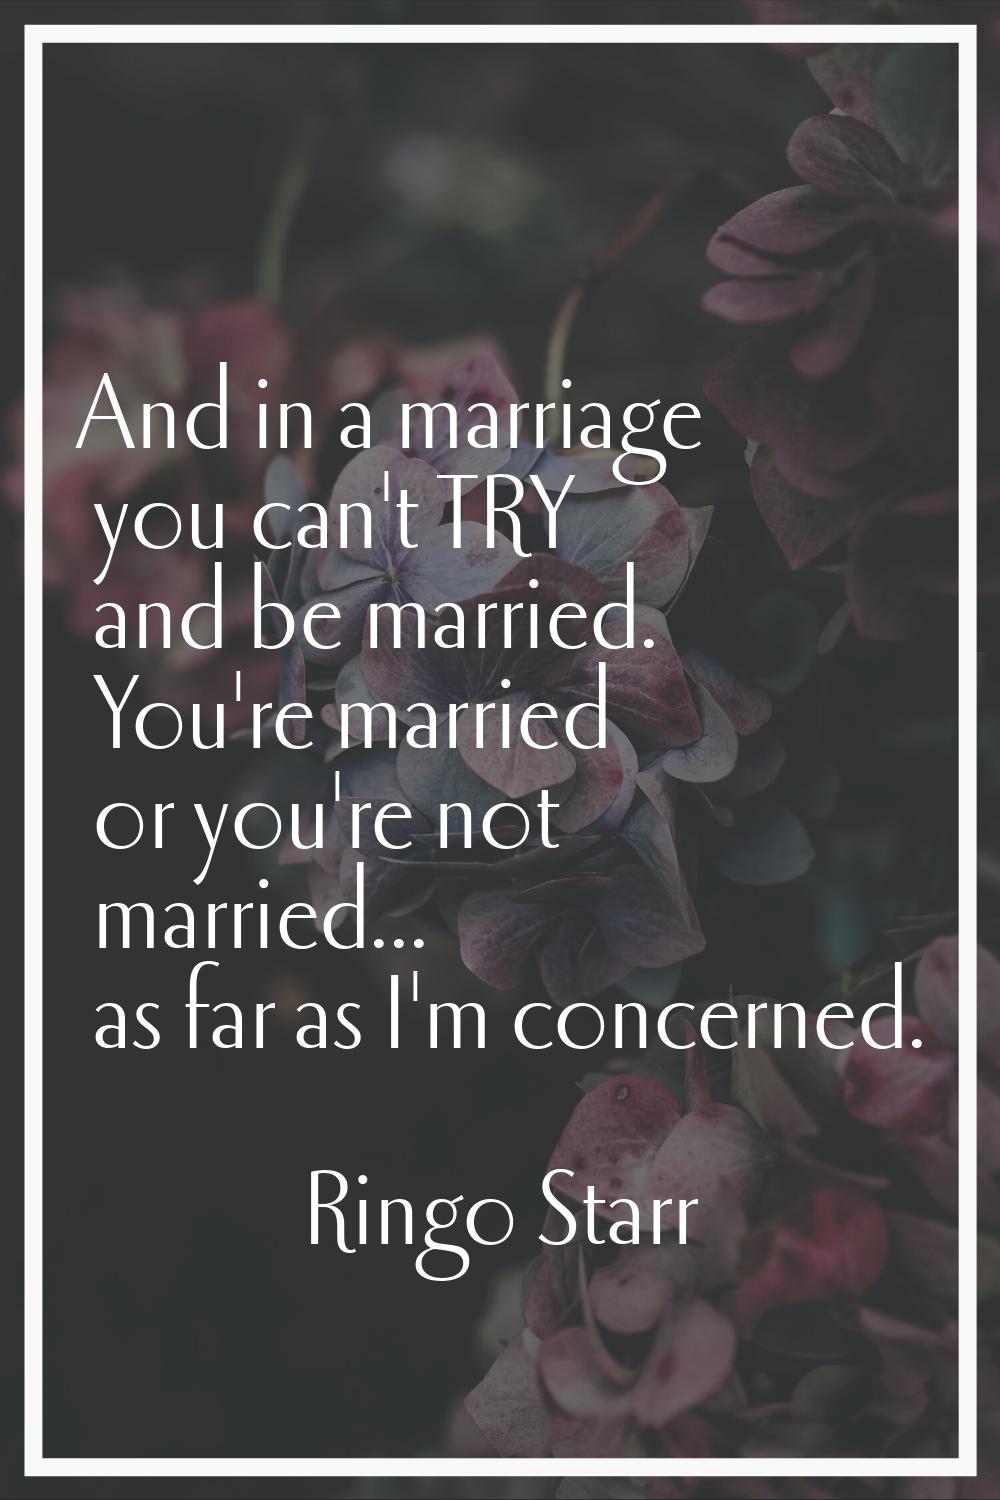 And in a marriage you can't TRY and be married. You're married or you're not married... as far as I